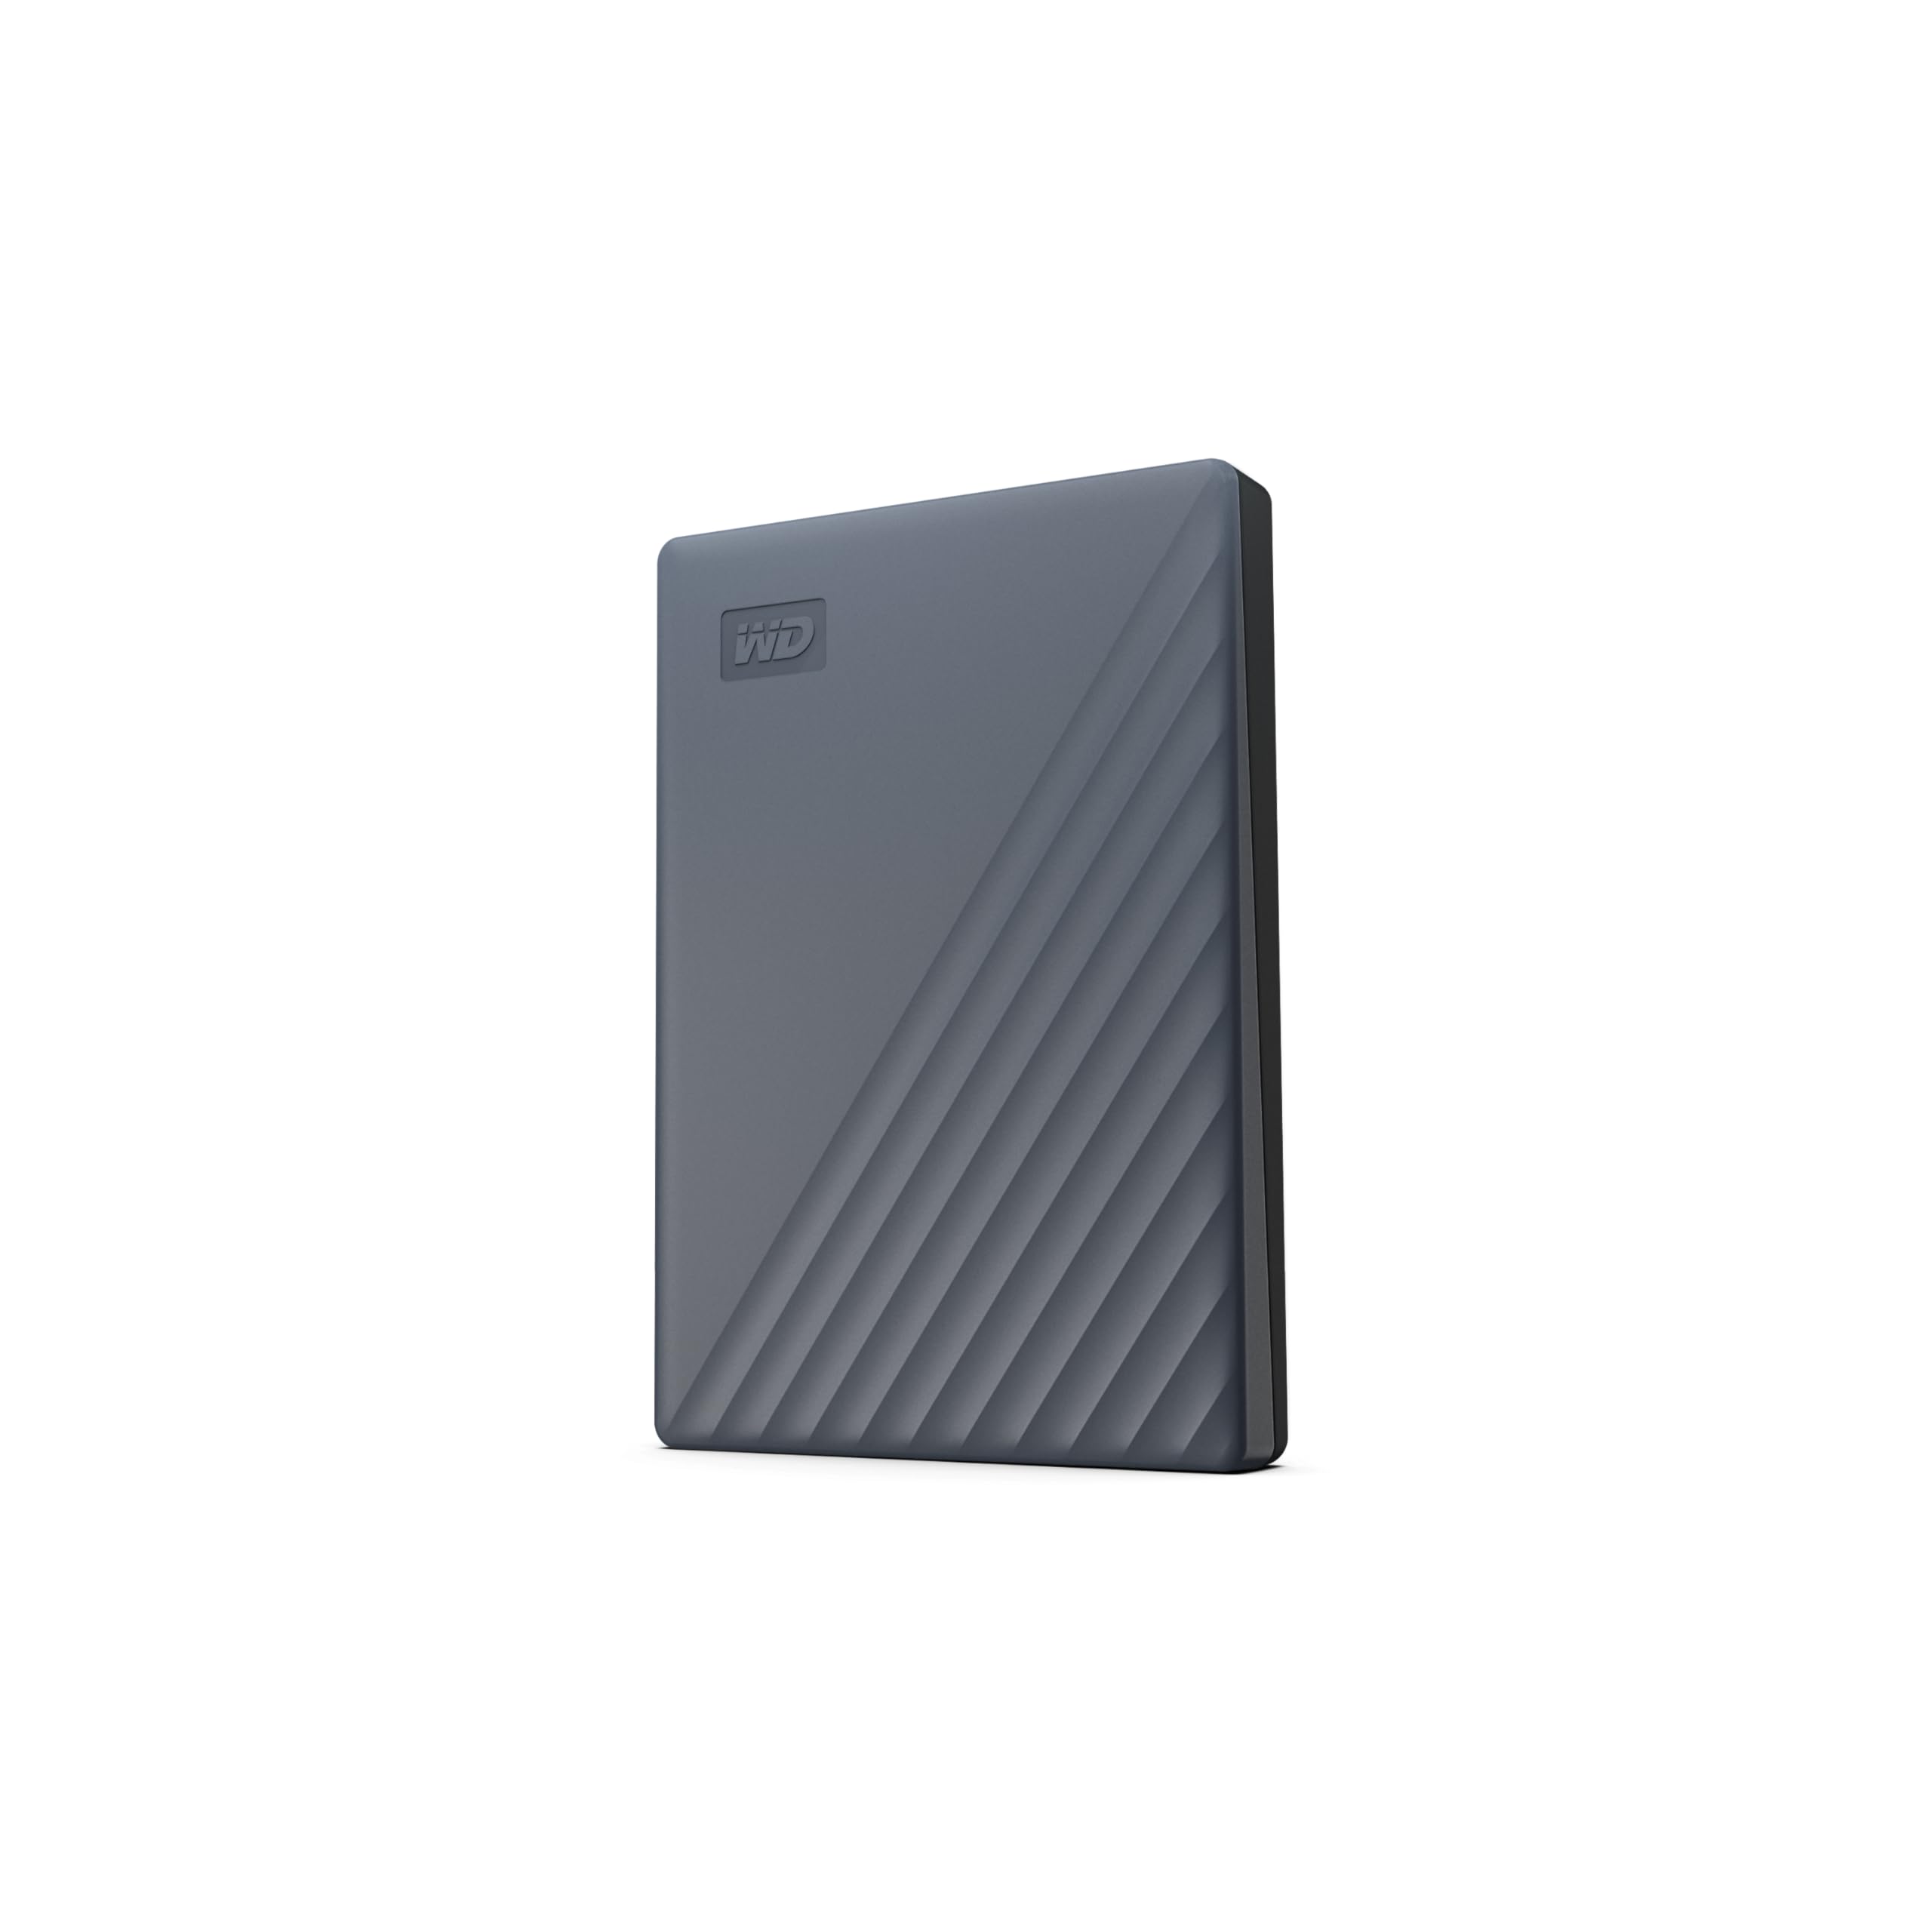 WD 5TB My Passport Portable Hard Drive, Works with USB-C and USB-A, Windows PC, Mac, Chromebook, Gaming Consoles and Mobile Devices, Backup Software and Password Protection - WDBRMD0050BGY-WESN